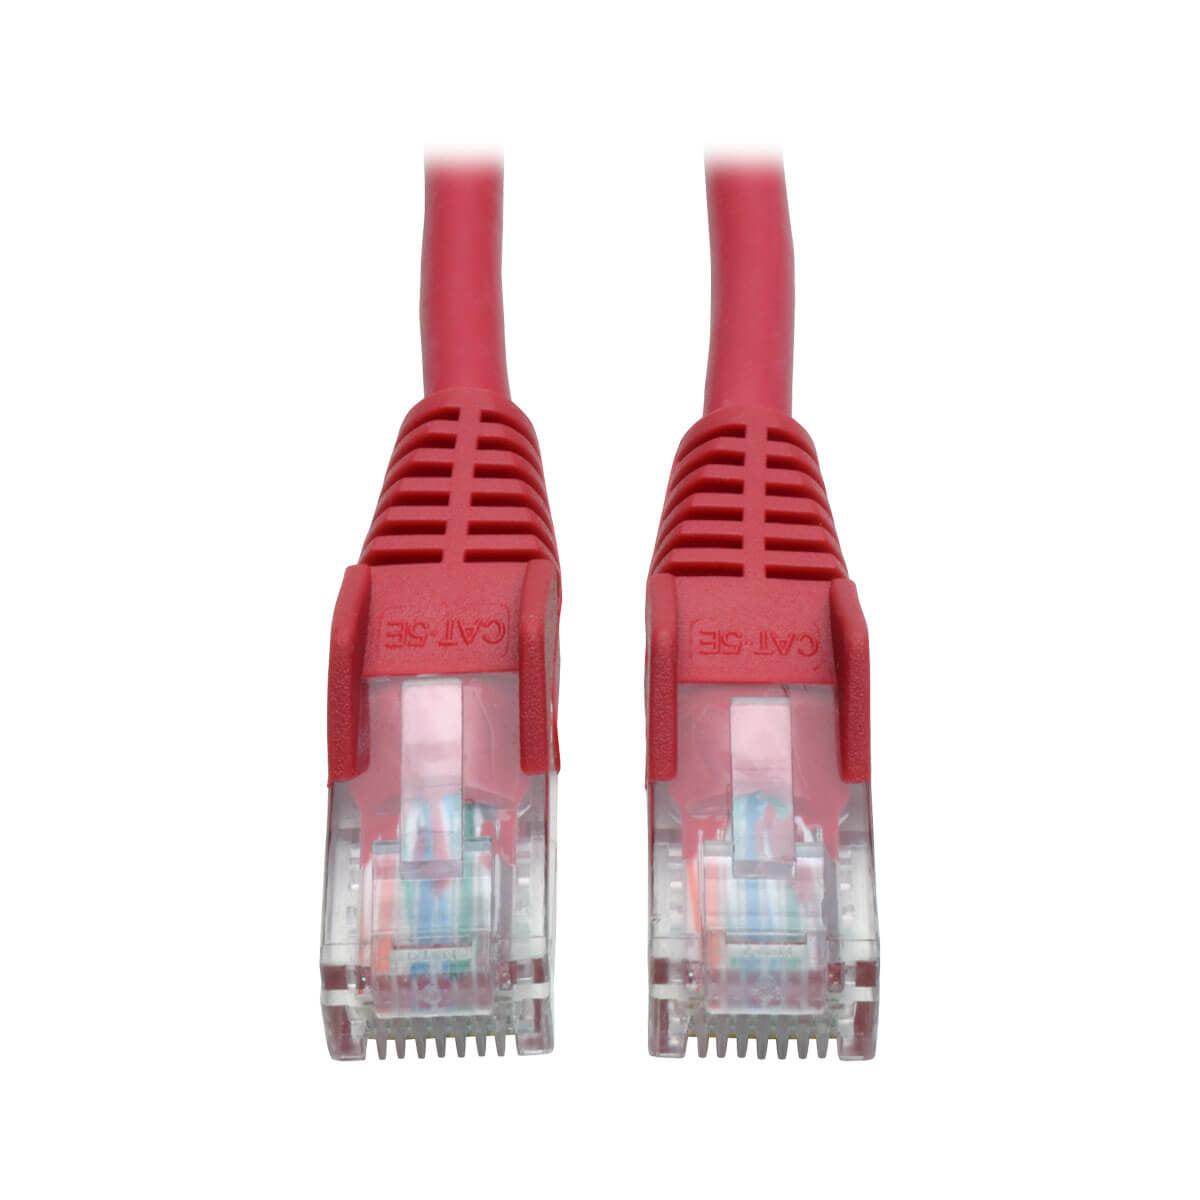 Tripp Lite N001-050-Rd Cat5E 350 Mhz Snagless Molded (Utp) Ethernet Cable (Rj45 M/M) - Red, 50 Ft. (15.24 M)